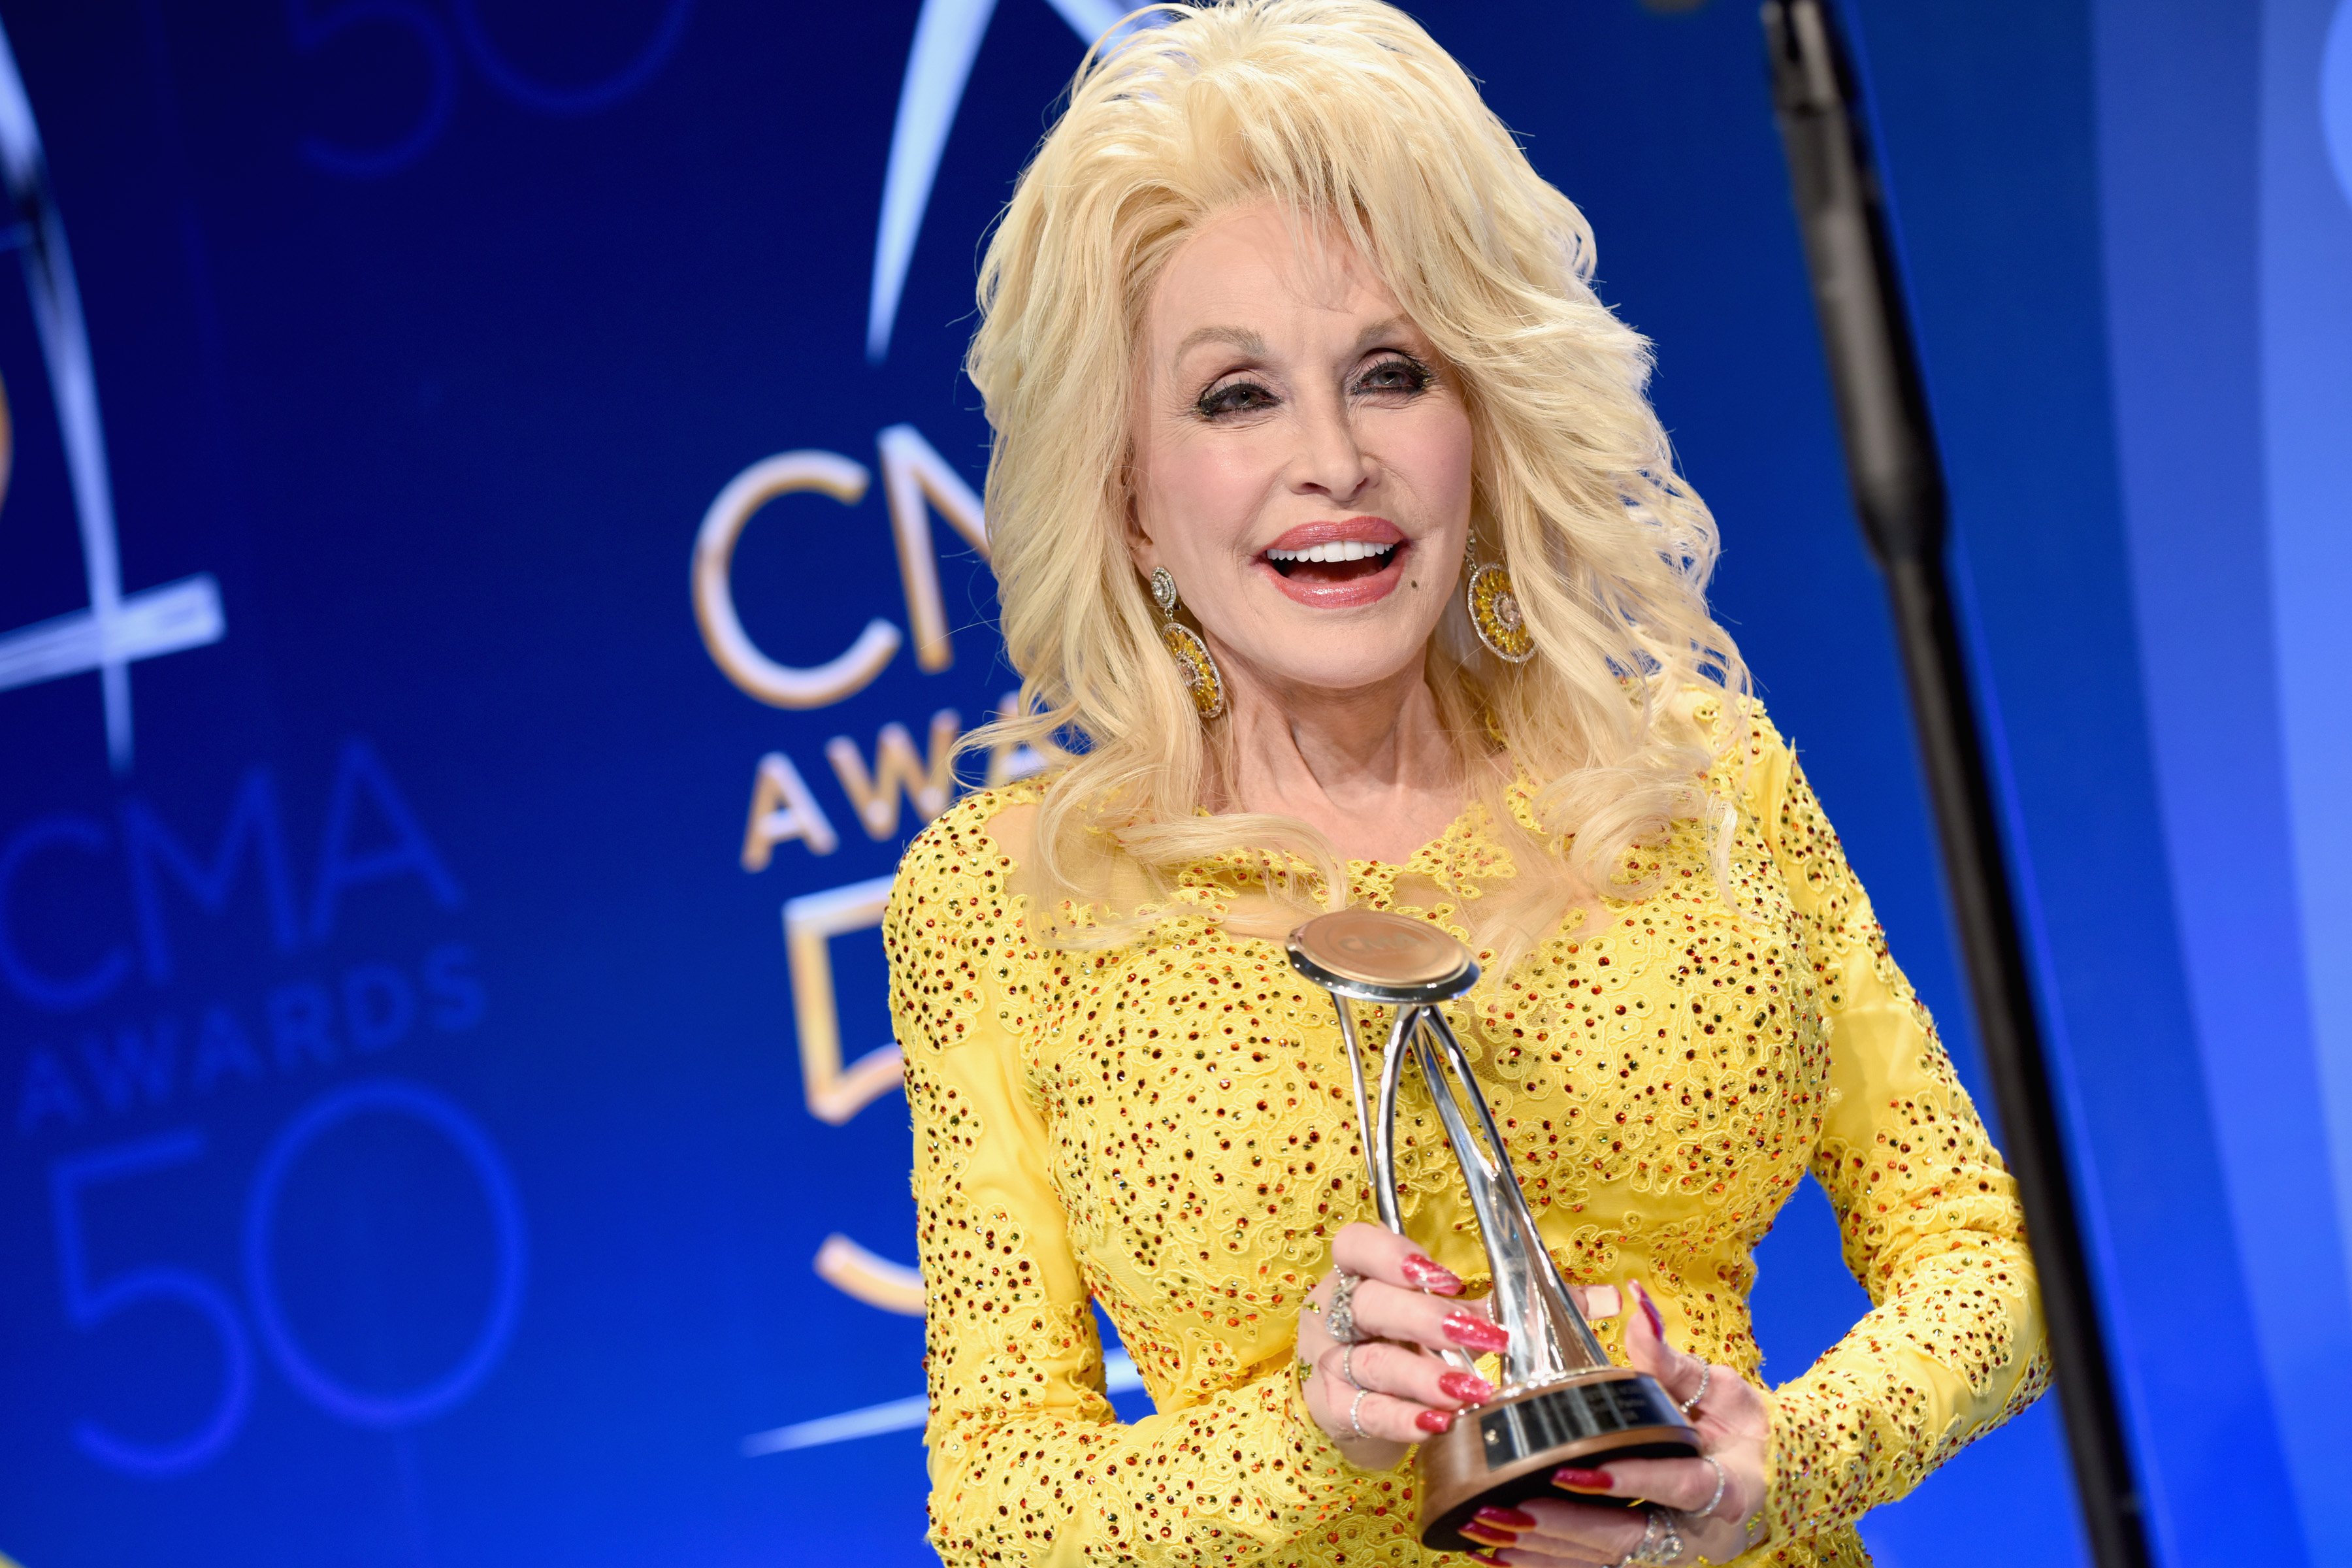 Dolly Parton wears a yellow jeweled dress while holding an award.